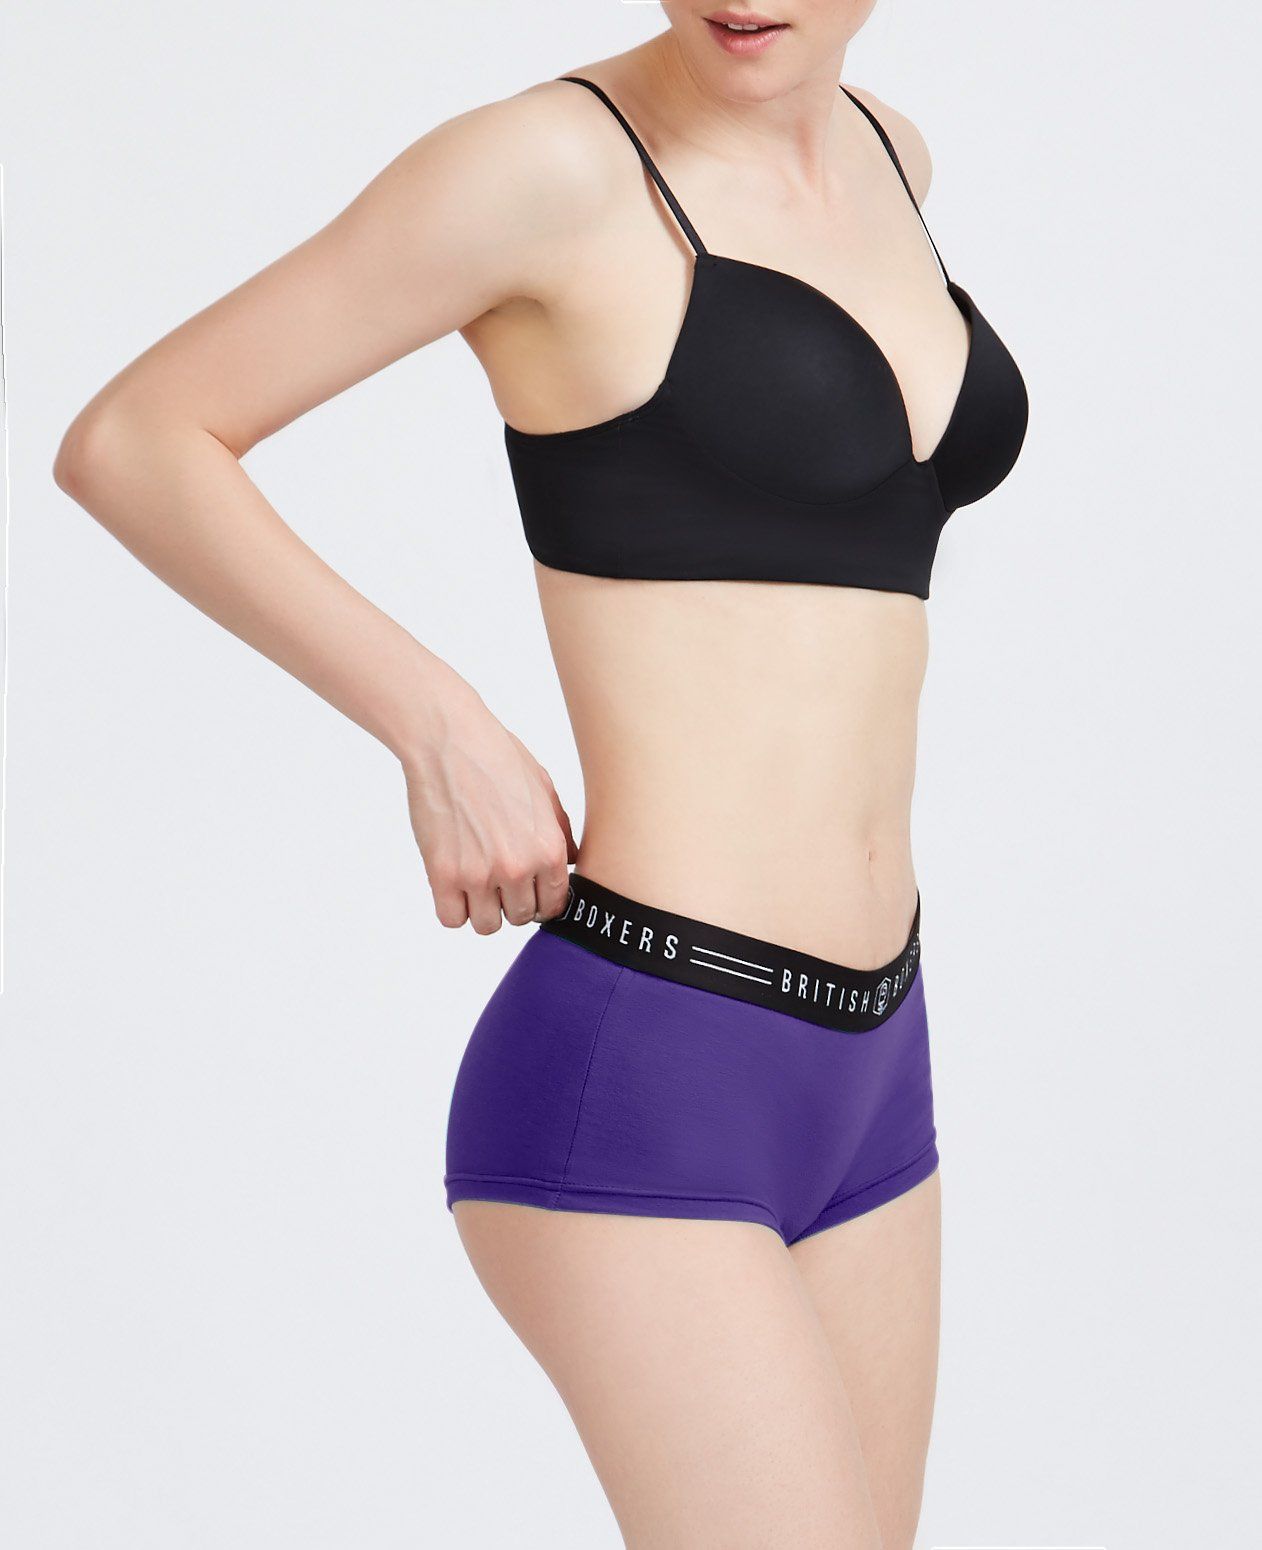 We’re offering you the opportunity to save 50% and buy 4 pairs of the same size for £28. You'll receive a random selection of colours and all the colours are fab! Our fitted women's hipster briefs are made from 180g, 95% Cotton and 5% Elastane which creates a wonderfully soft and stretchy fabric thats also hugely supportive right where you need it. They have a comfortable black and white silky soft waistband and all our colours stay true wash after wash, never fading. You'll receive a random selection but they are all the same 180g flat seamed jersey we always use, all beautifully cut and there are no garish prints or horrendous colours.  Choose your size and receive 4 pairs of hipster briefs.